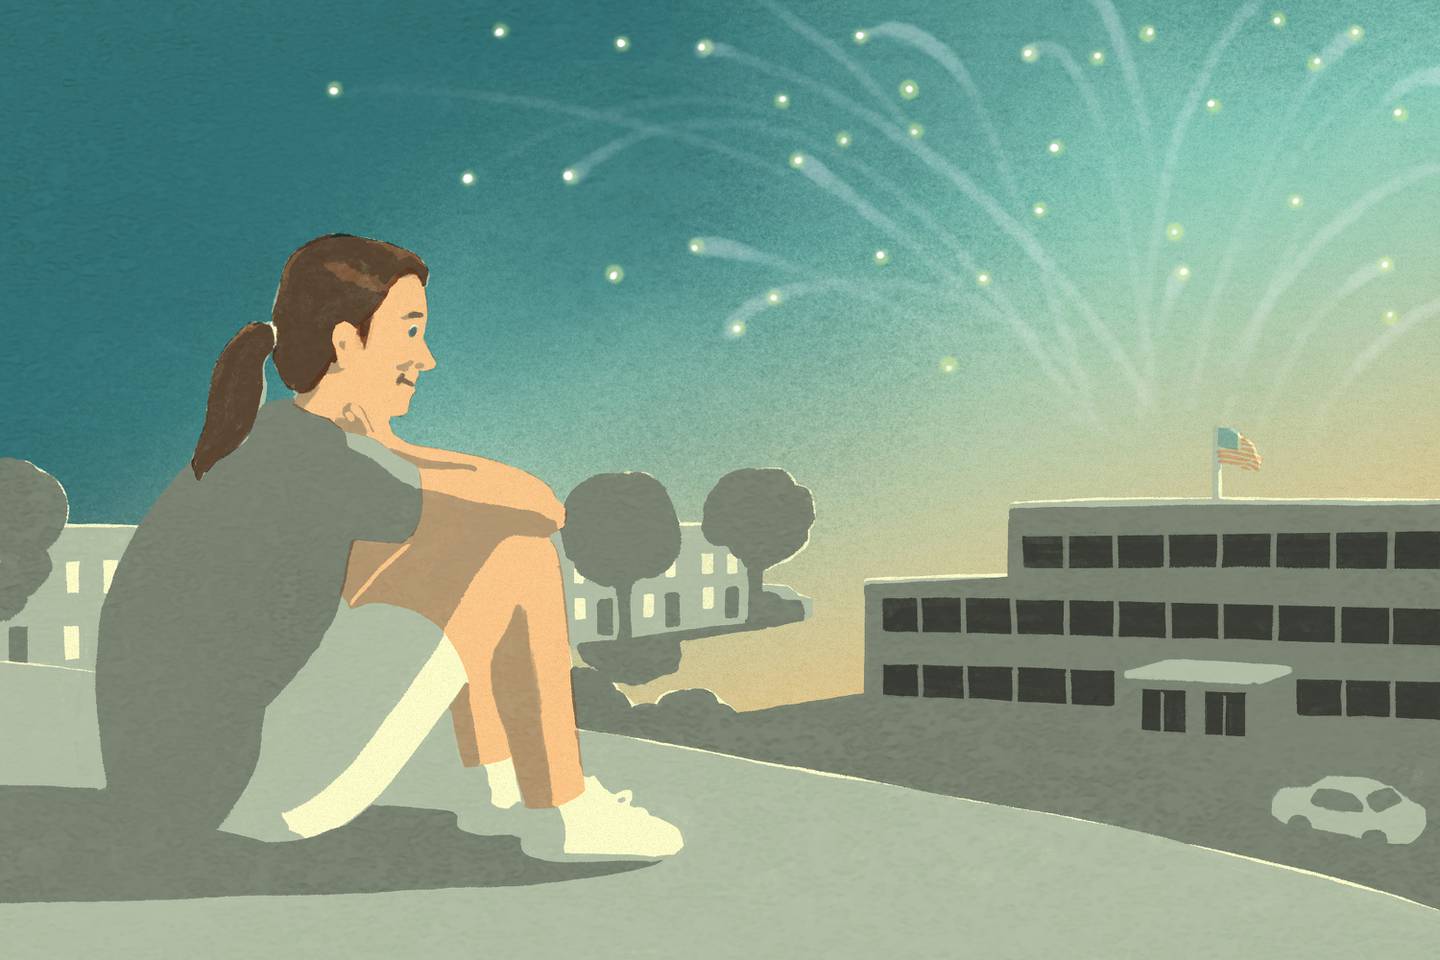 Illustration of white woman, on left side of composition, sitting on hill at dawn overlooking school building with American flag and row houses, stars radiating outward from the school.